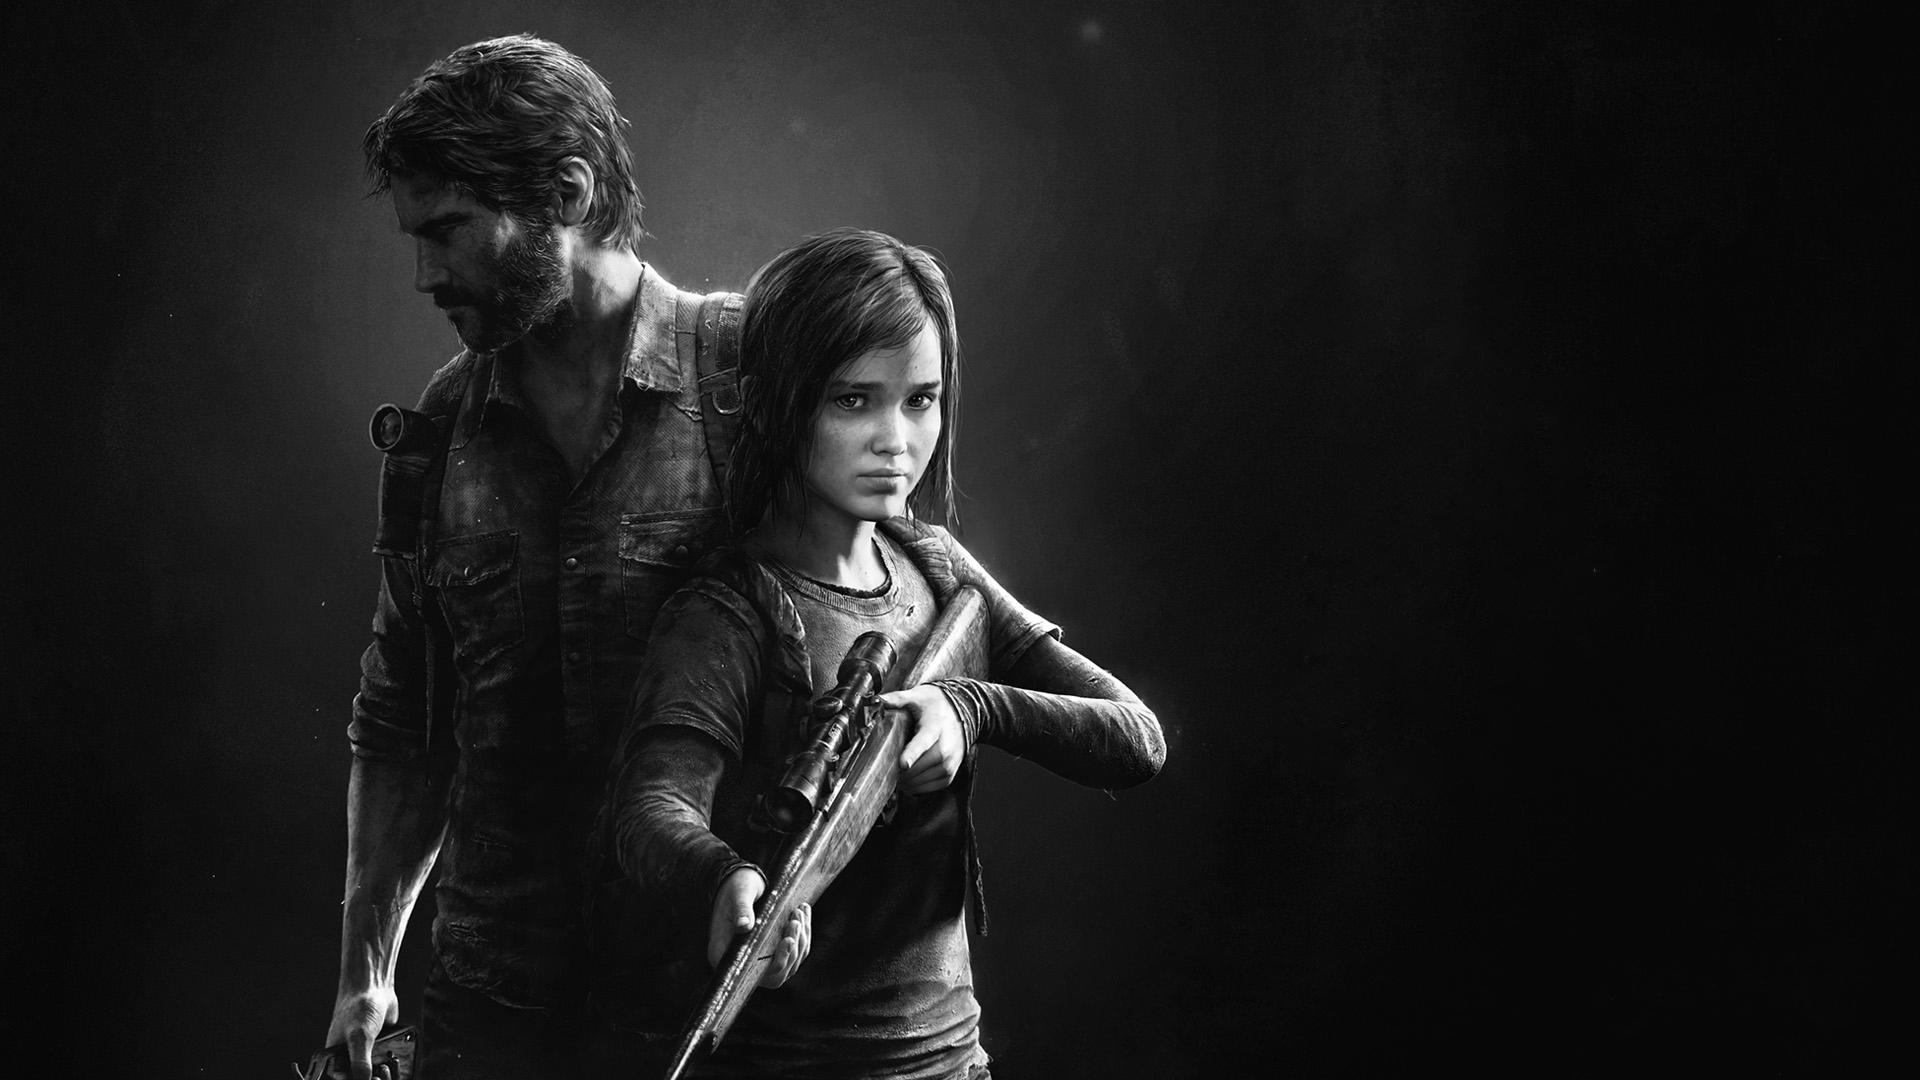 the last of us remastered gamestop download free